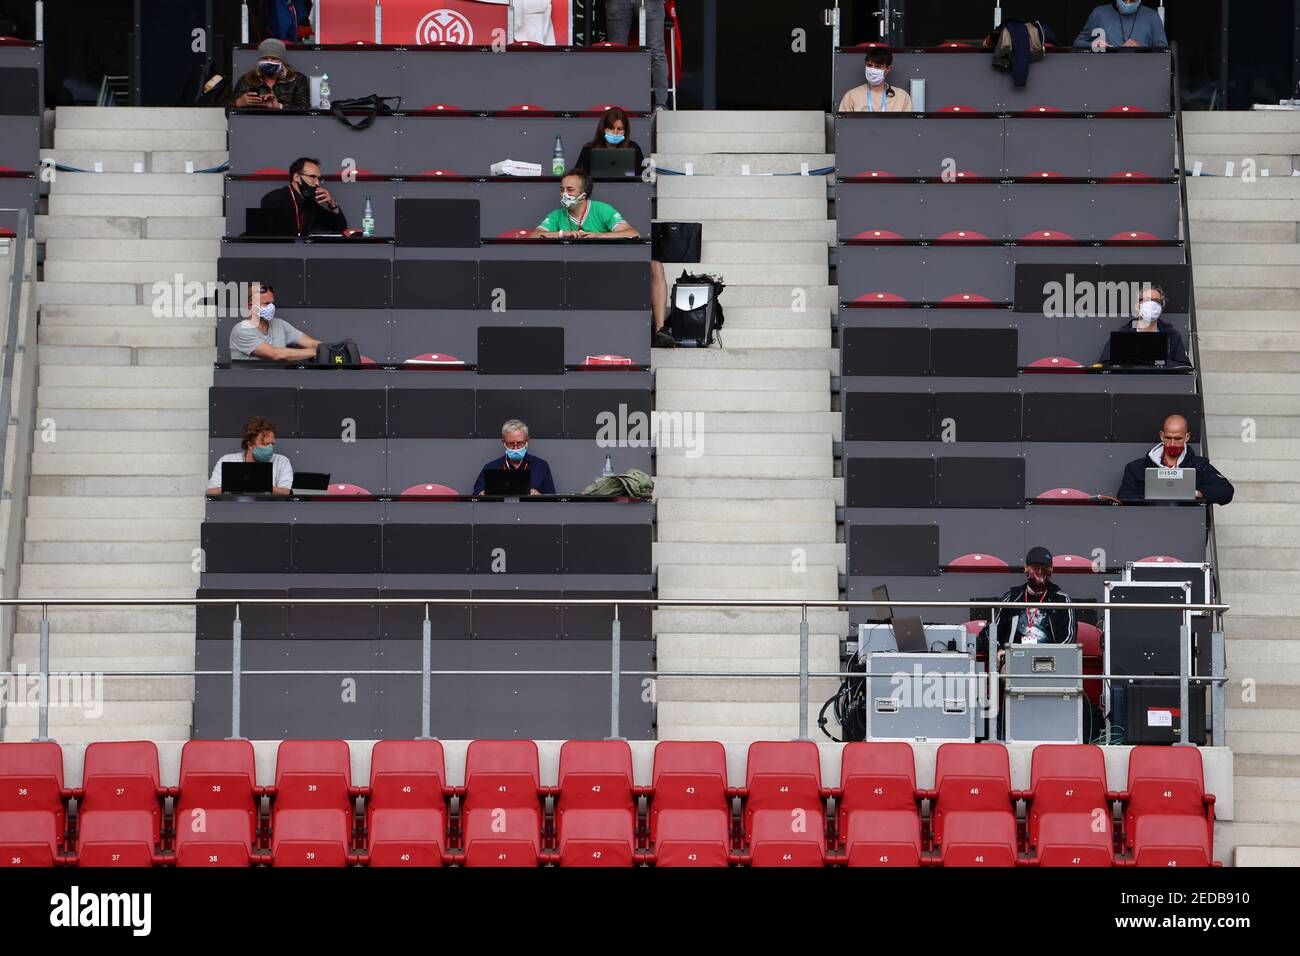 Soccer Football - Bundesliga - 1. FSV Mainz 05 v RB Leipzig - Opel Arena, Mainz, Germany - May 24, 2020  Members of the media wearing face masks in the tribune, as play resumes behind closed doors following the outbreak of the coronavirus disease (COVID-19)  REUTERS/Kai Pfaffenbach/Pool    DFL regulations prohibit any use of photographs as image sequences and/or quasi-video Stock Photo